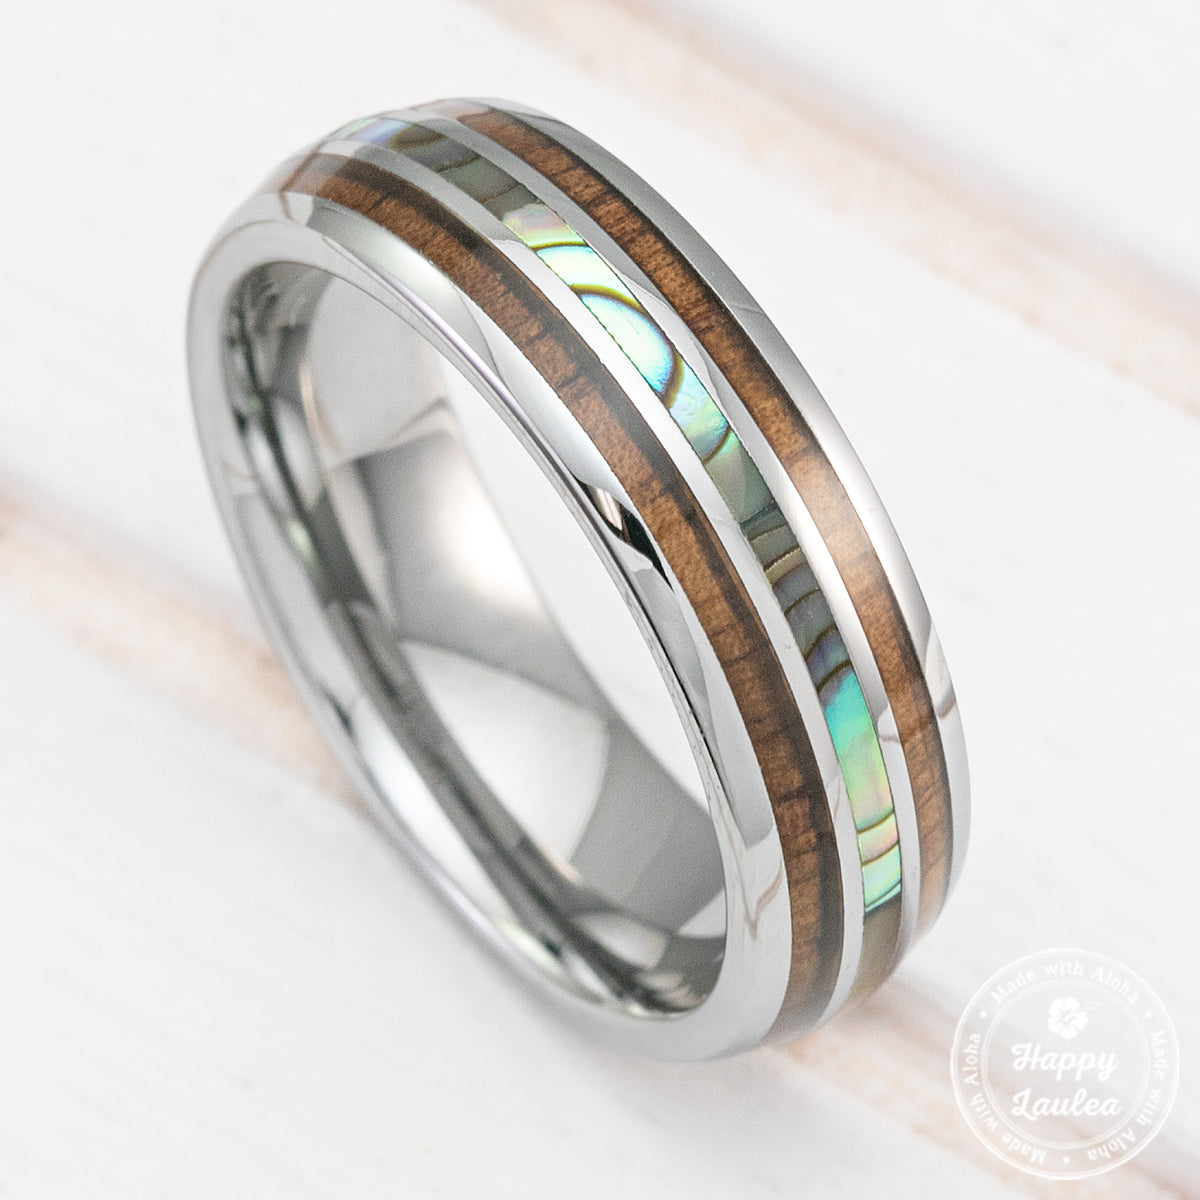 Tungsten Carbide Ring with Koa Wood & Abalone Shell Tri Inlay - 6mm, Dome Shape Comfort Fitment